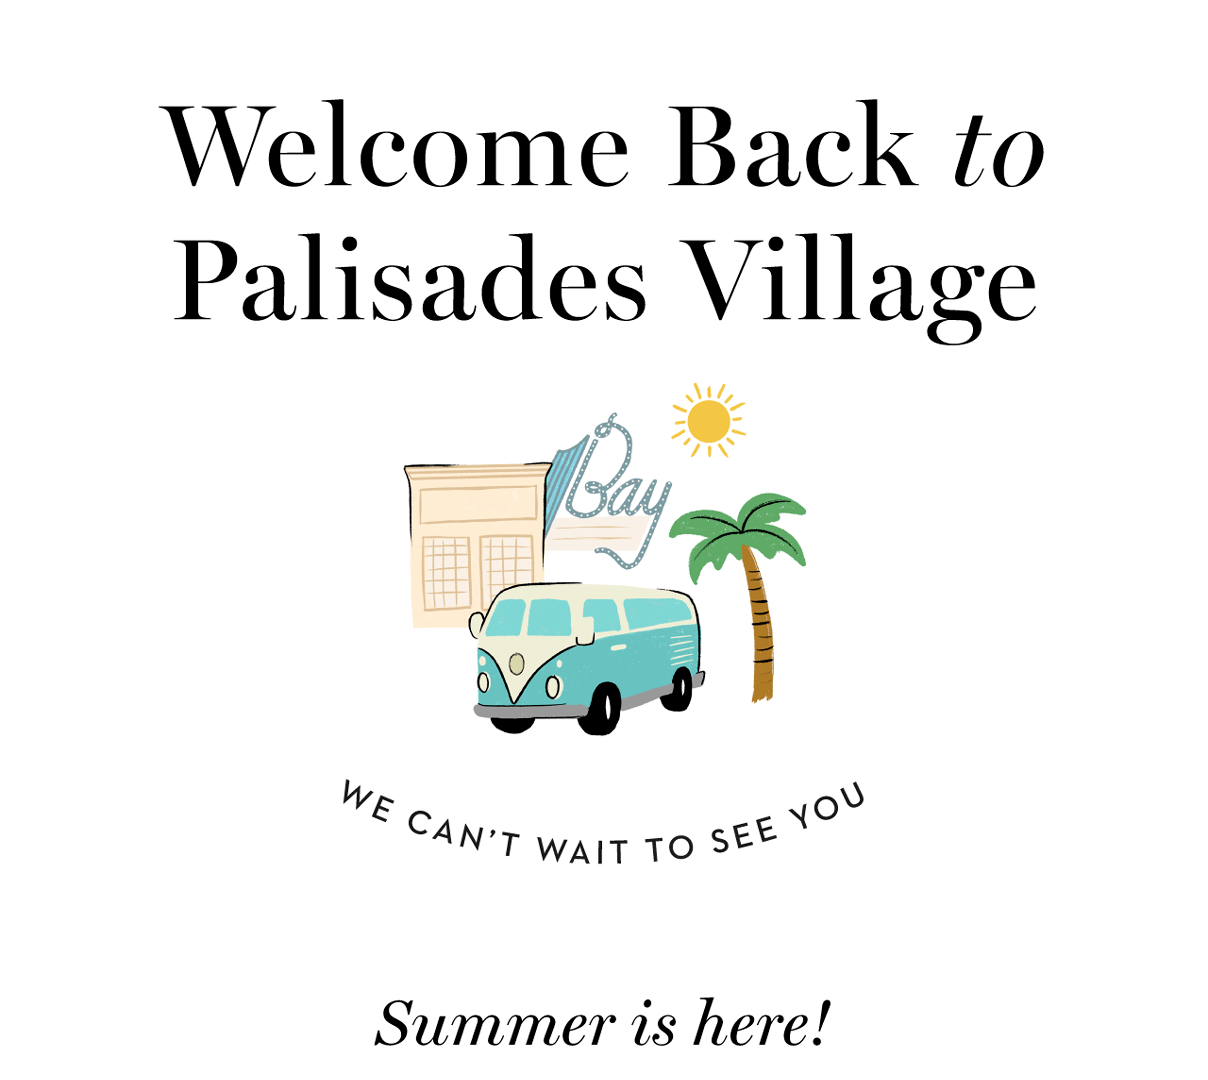 If you were looking for a sign to visit #PalisadesVillage this